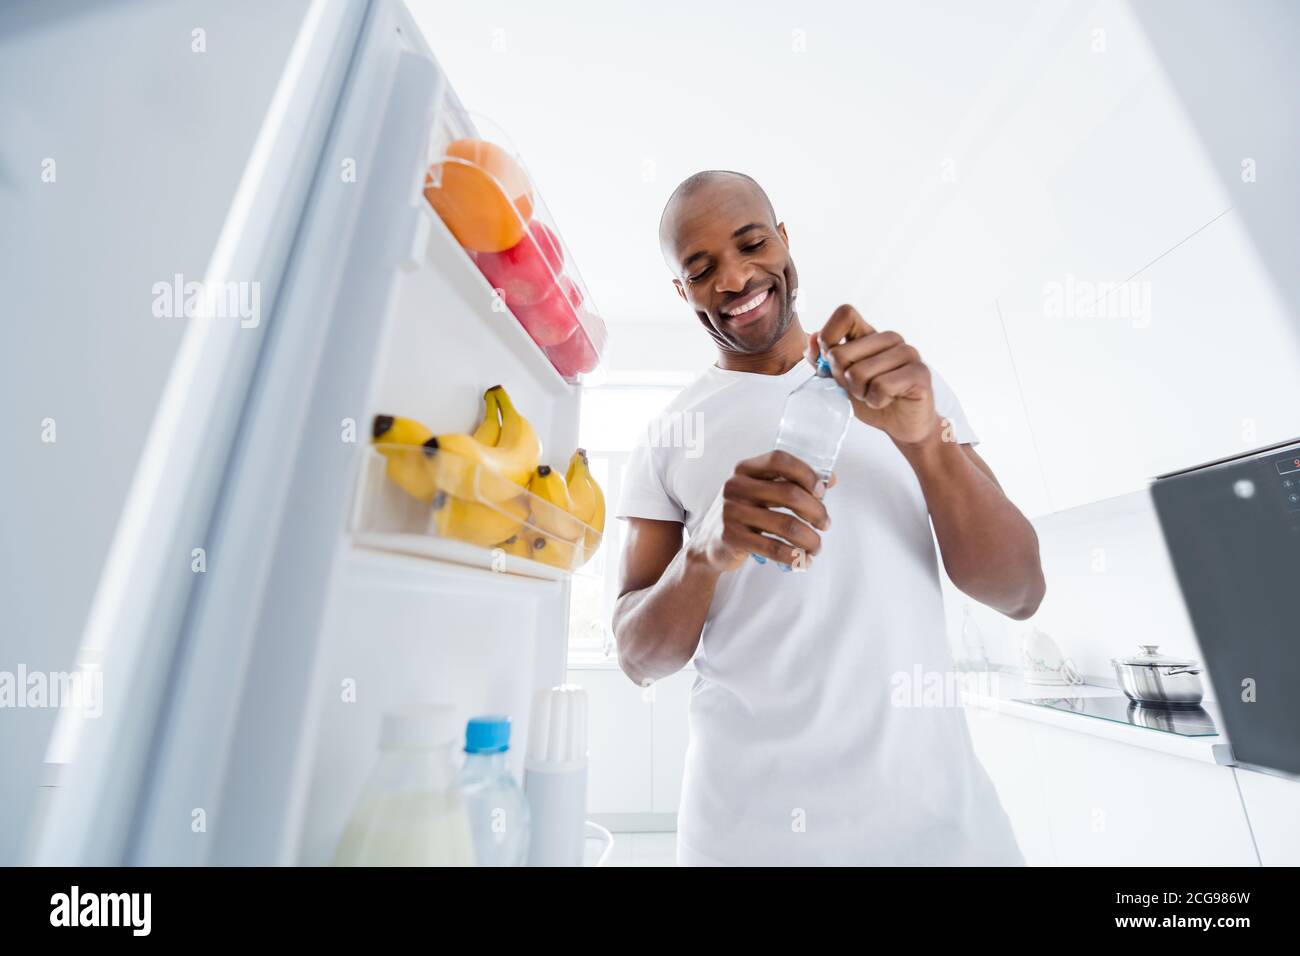 Water dispenser fridge hi-res stock photography and images - Alamy